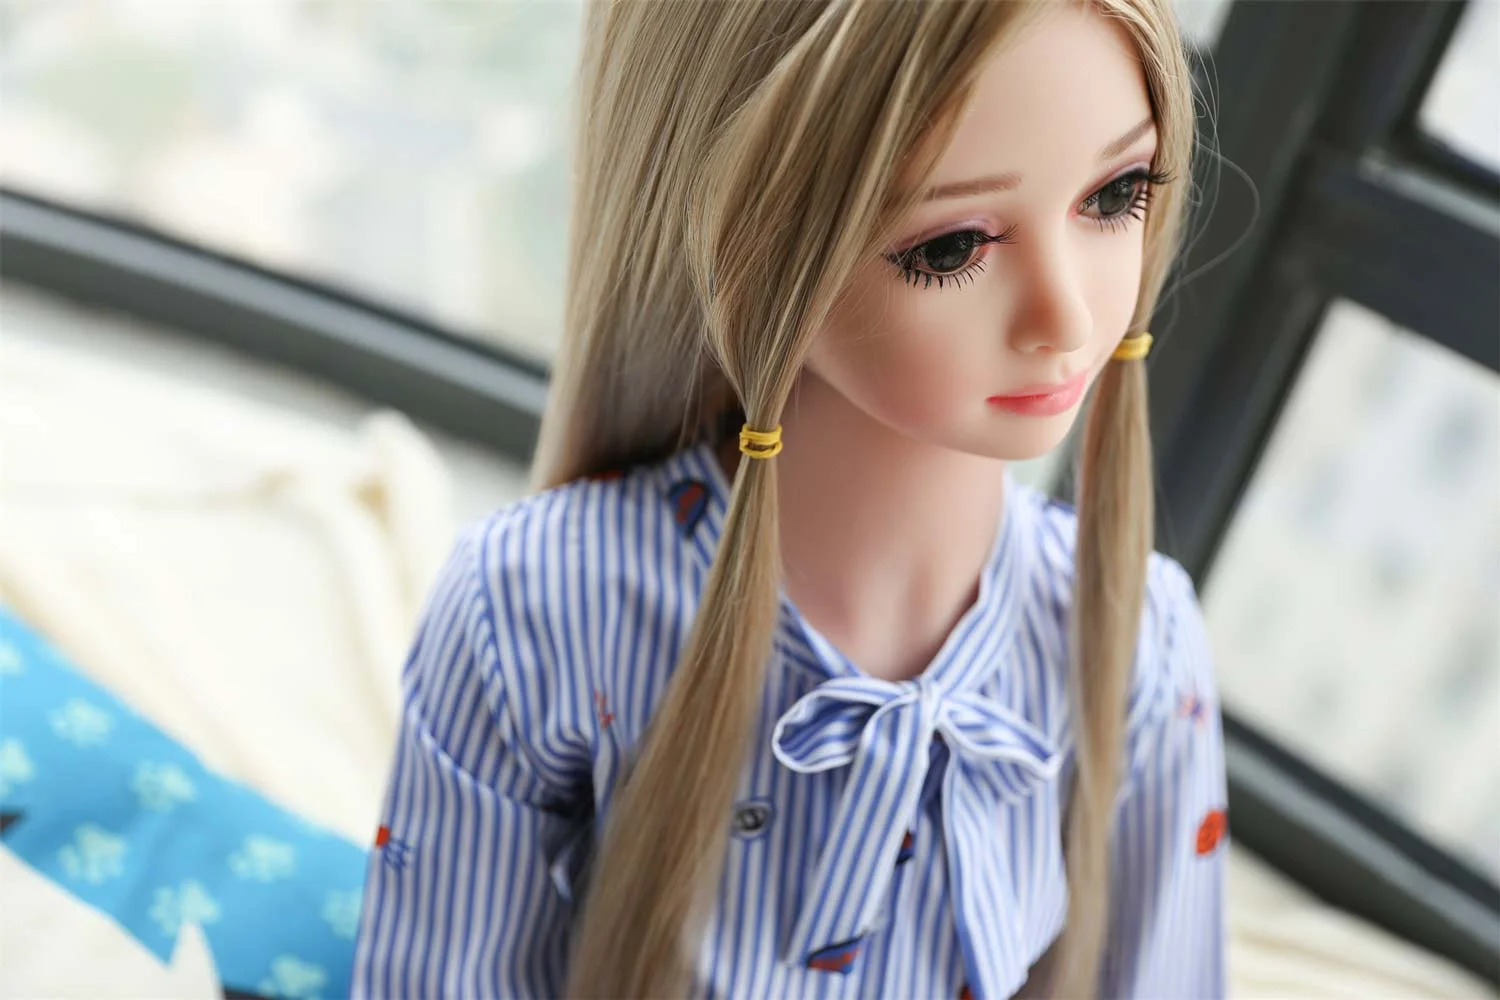 Mini sex doll with two strands of hair